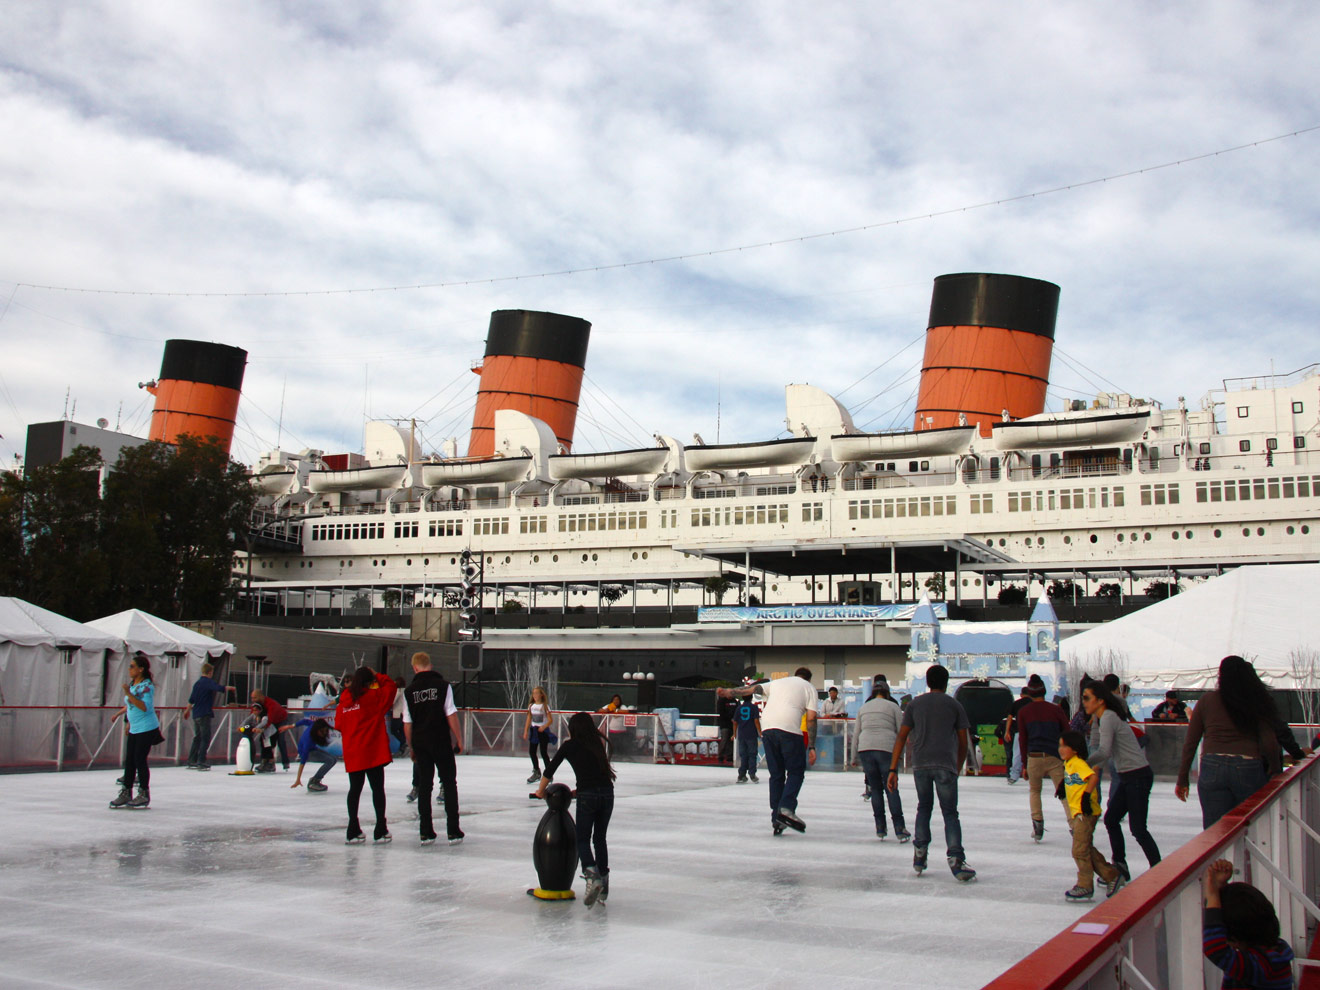 Outdoor ice skating at the Queen Mary